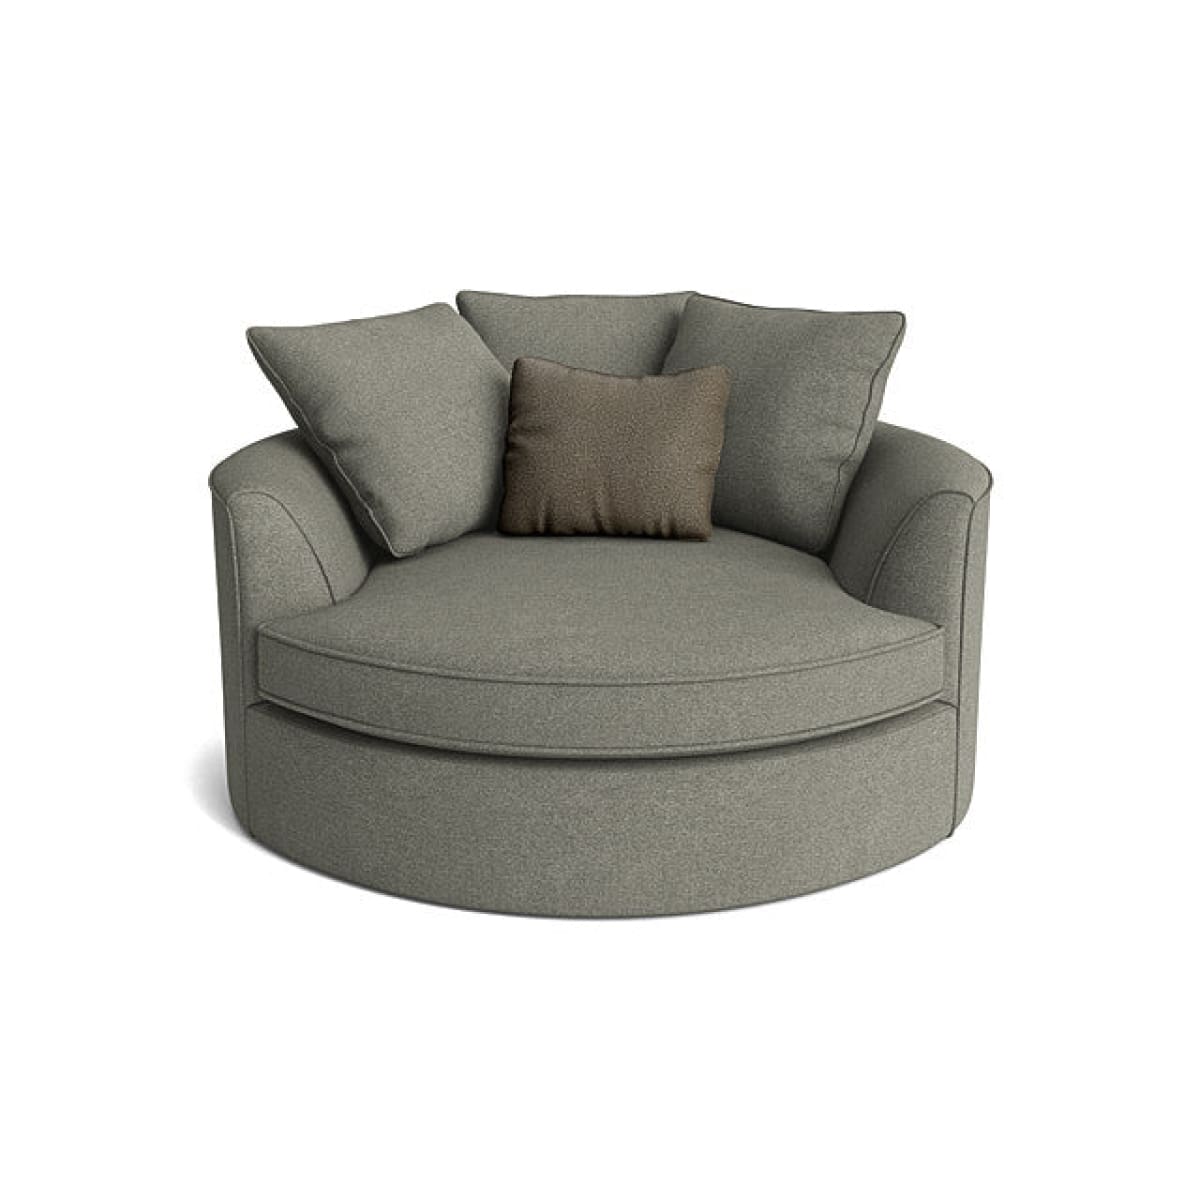 Nest Accent Chair - Prime Smoke